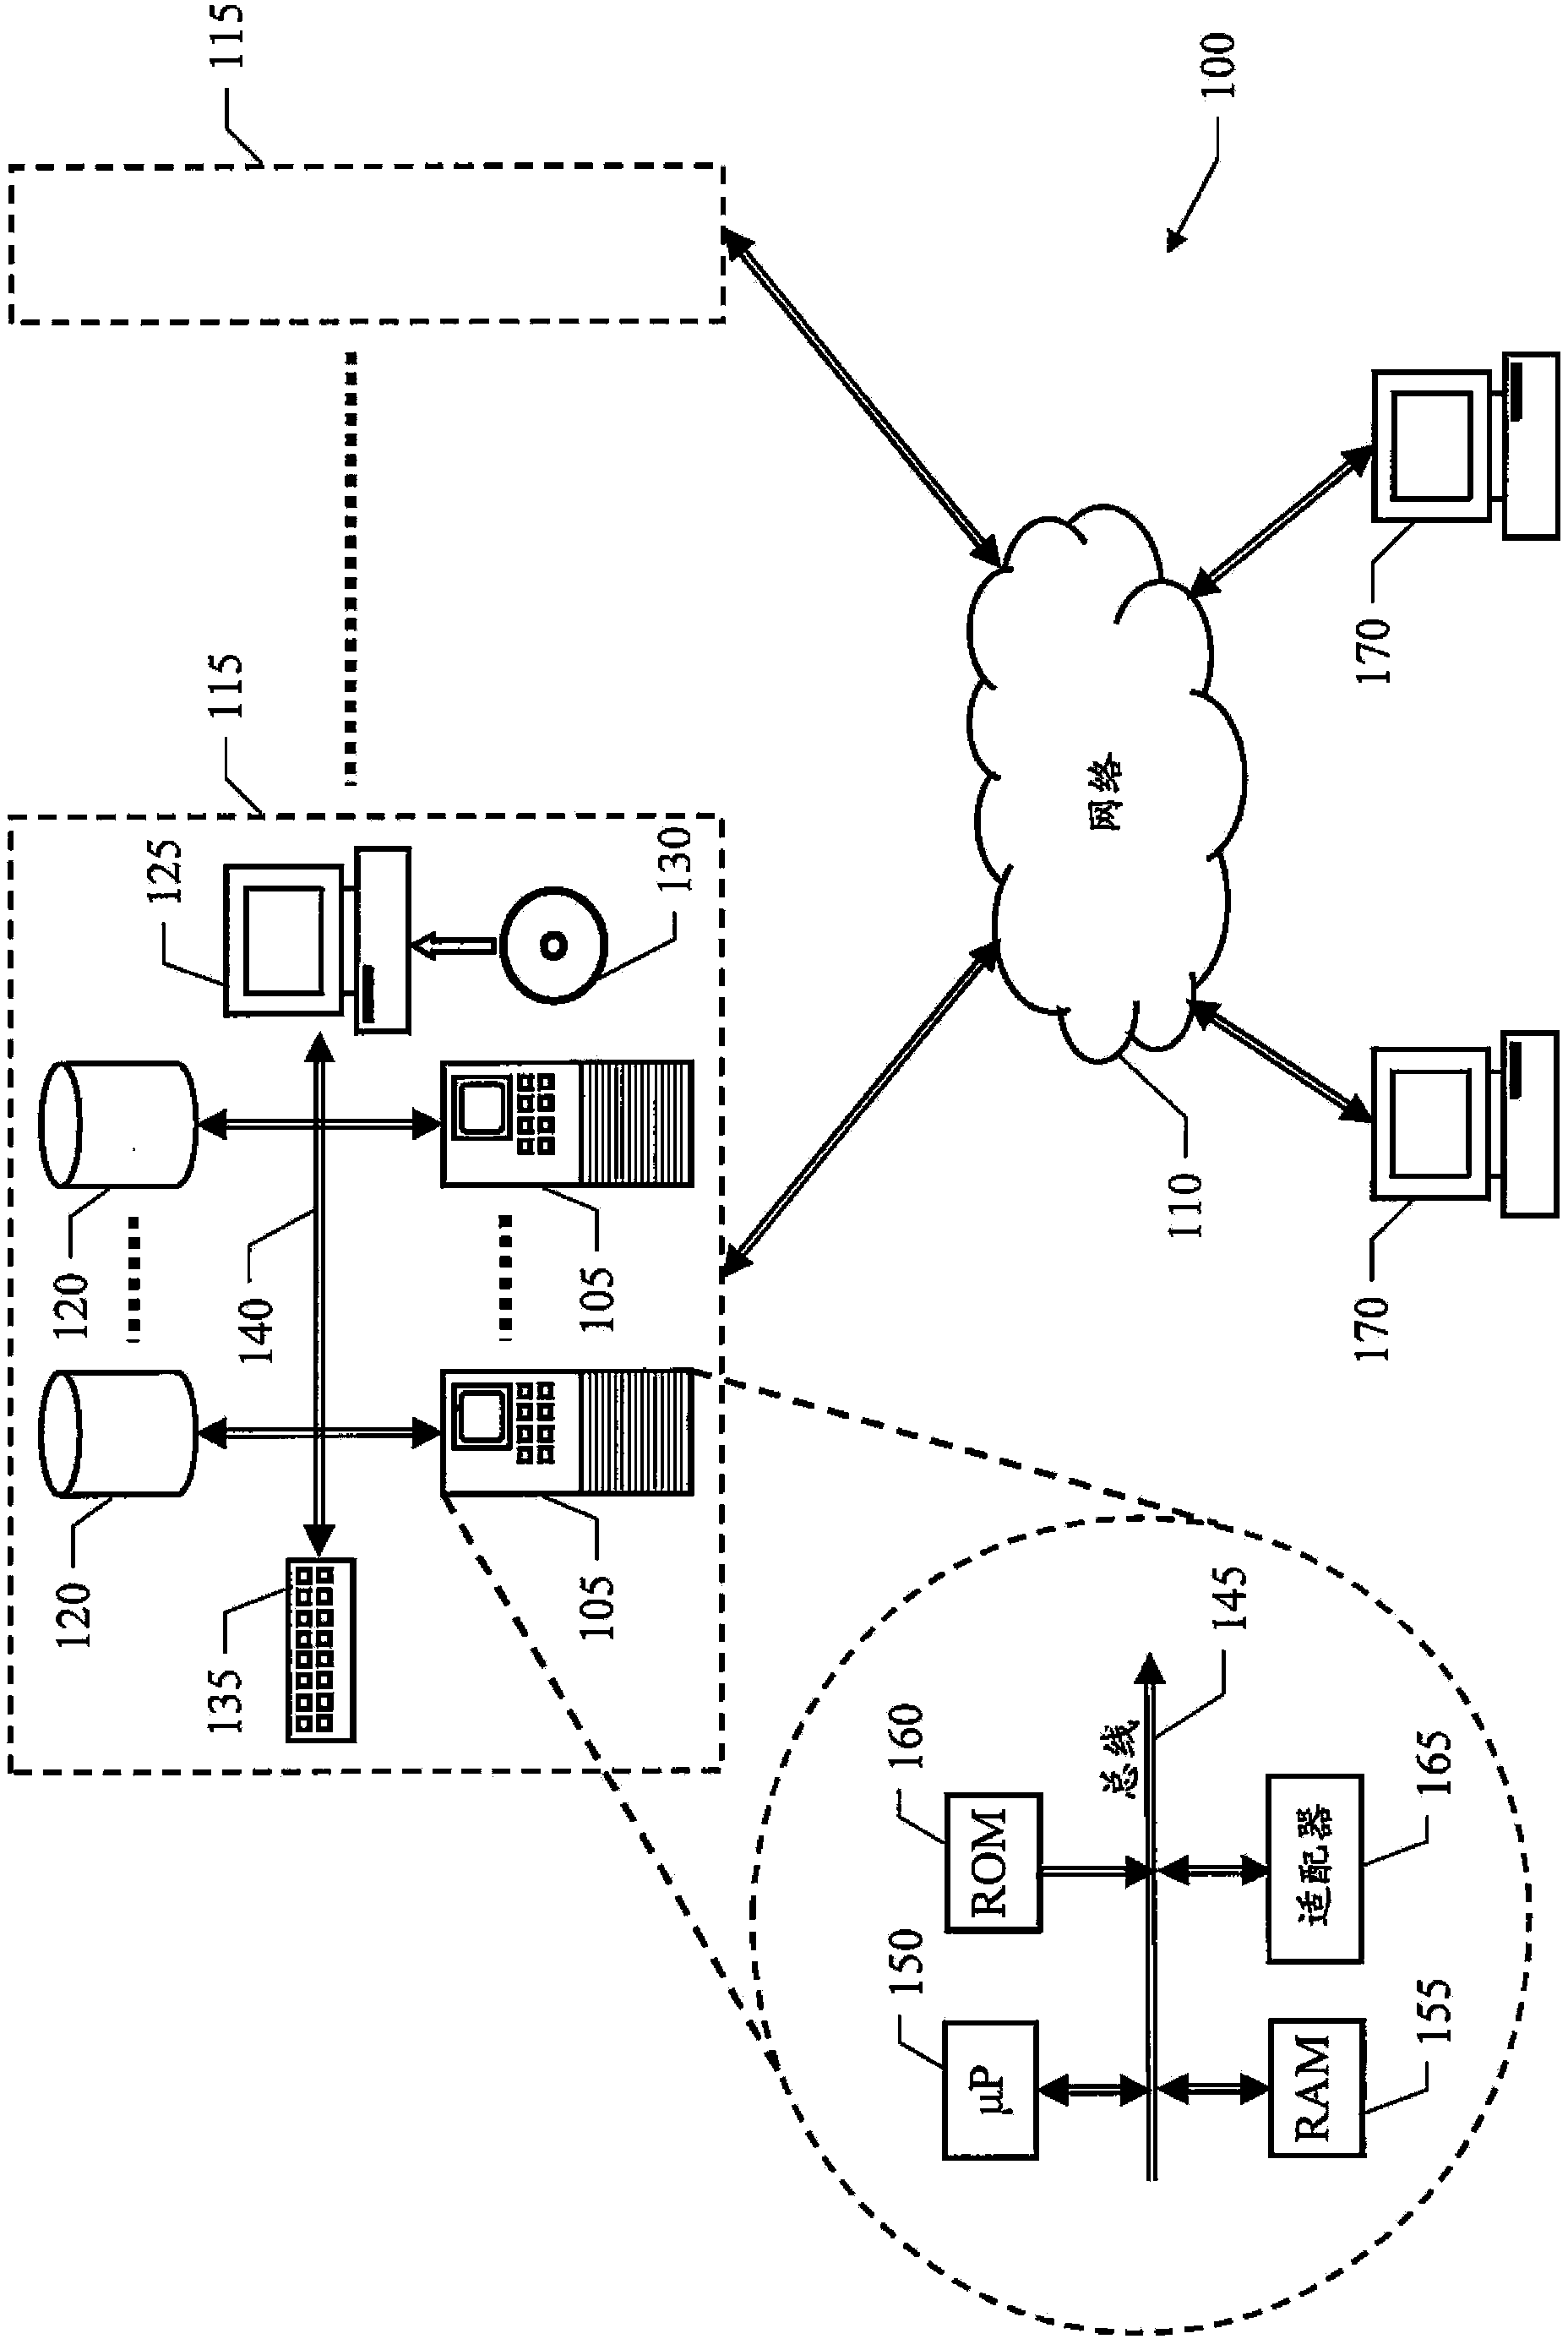 Method and system for de-serializing source object of source software into target software component